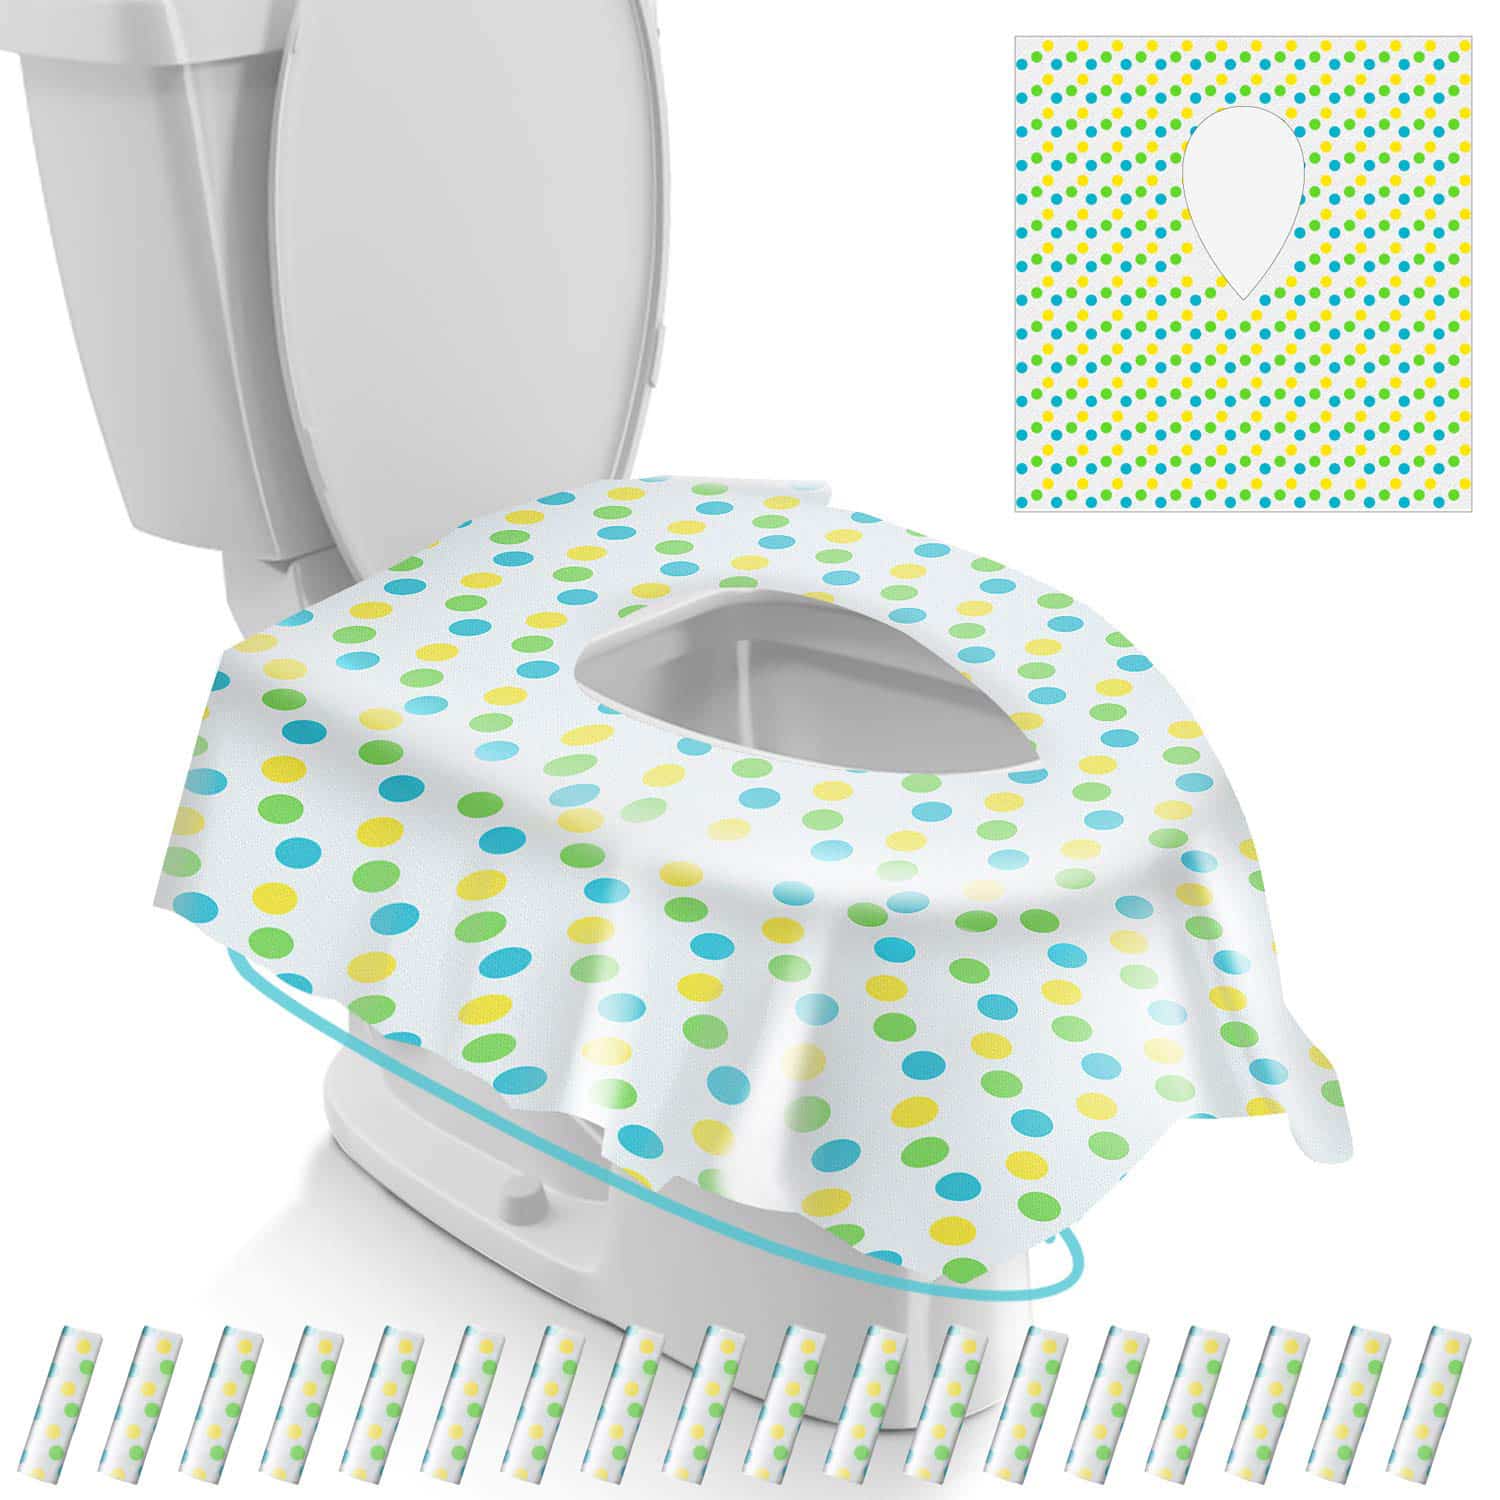 travel disposable toilet seat covers